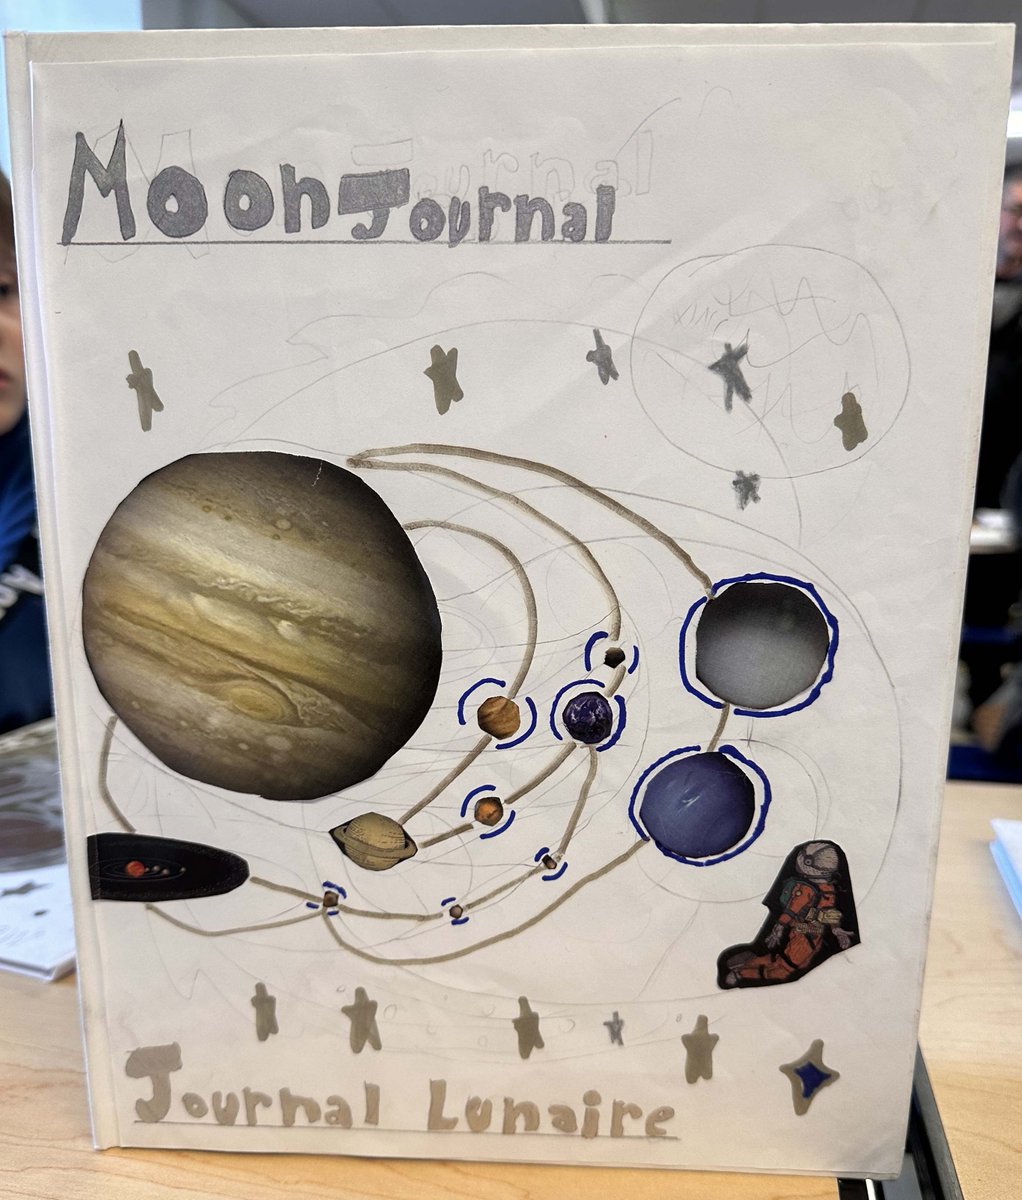 Our Grade 3 students have recently embarked on an exciting journey with their Moon Journals. Today, they hosted a Moon Journal event, inviting their parents to witness their special creations: journals, drawings, writings, & songs.#moonjournal #moon #lune #journaldelalune #ISBOS